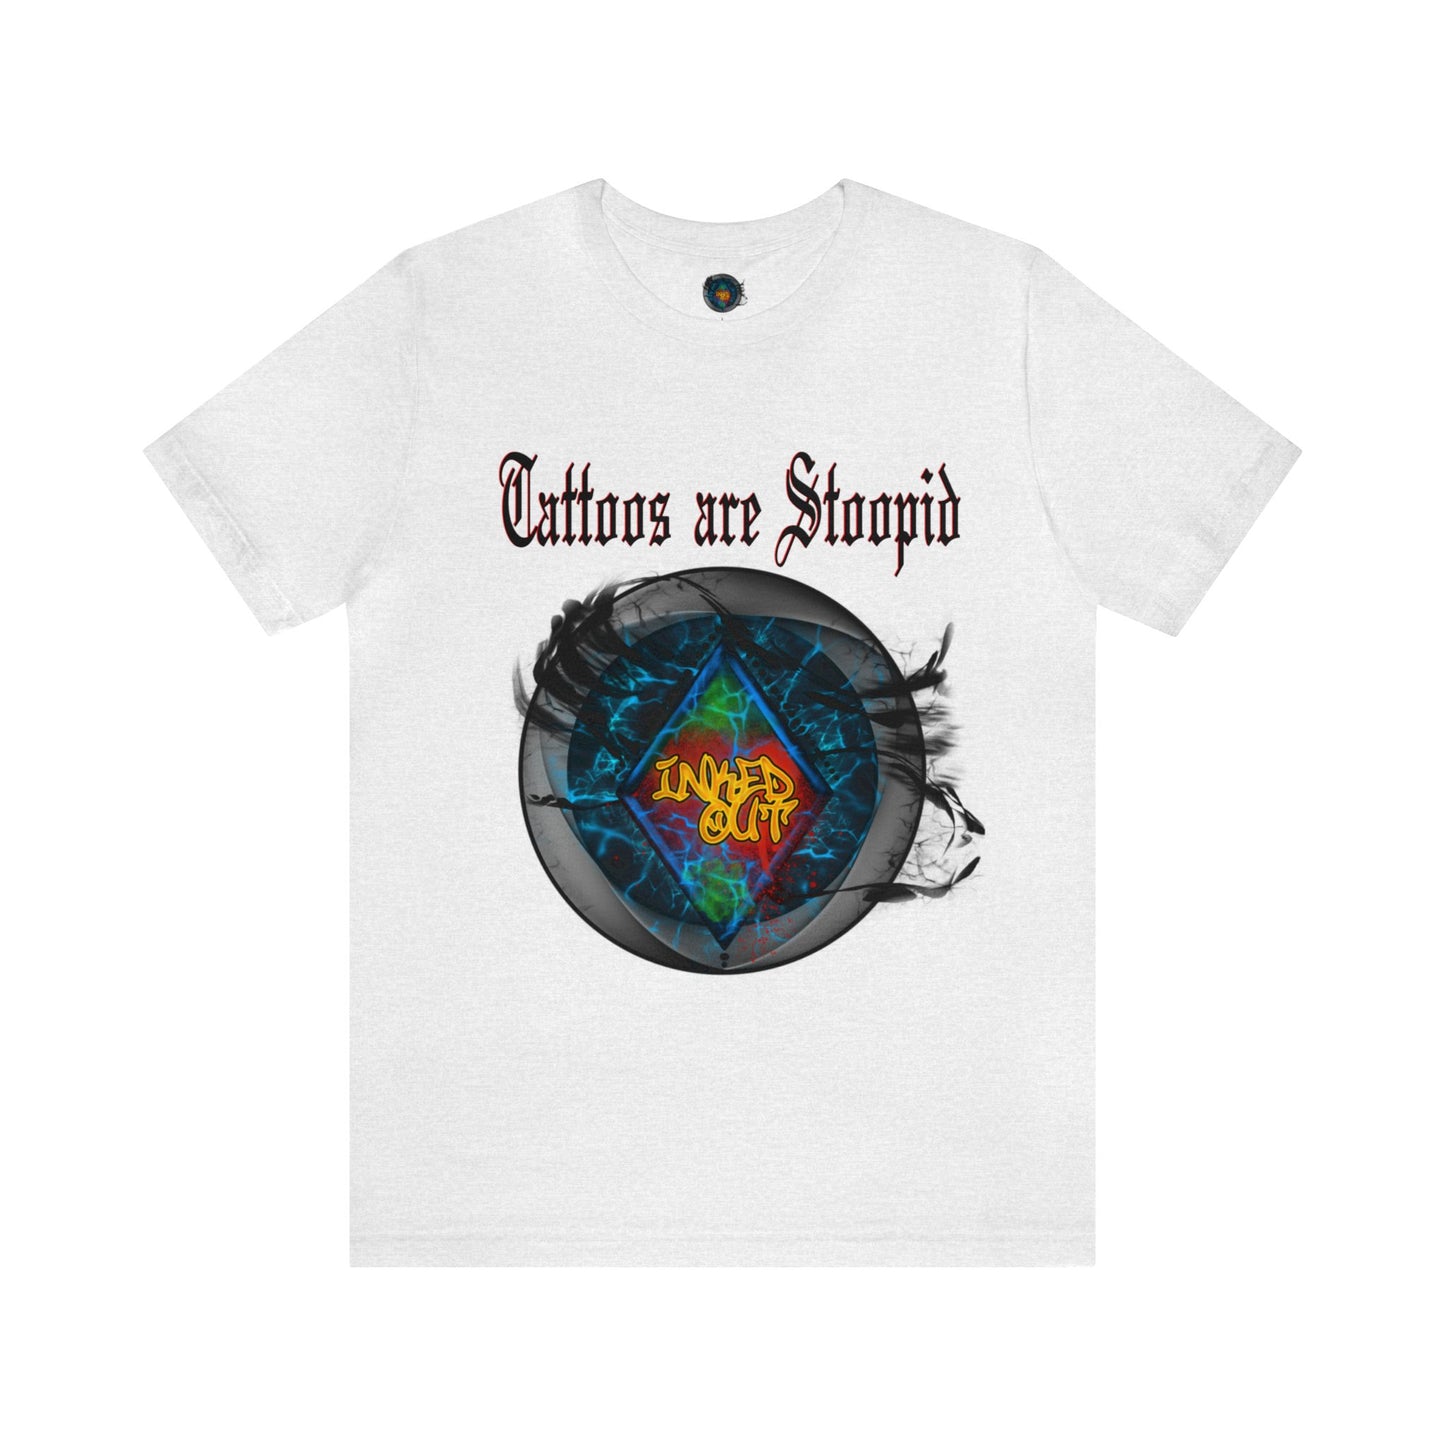 Tattoos are Stoopid Red Letters Unisex Jersey Short Sleeve Tee